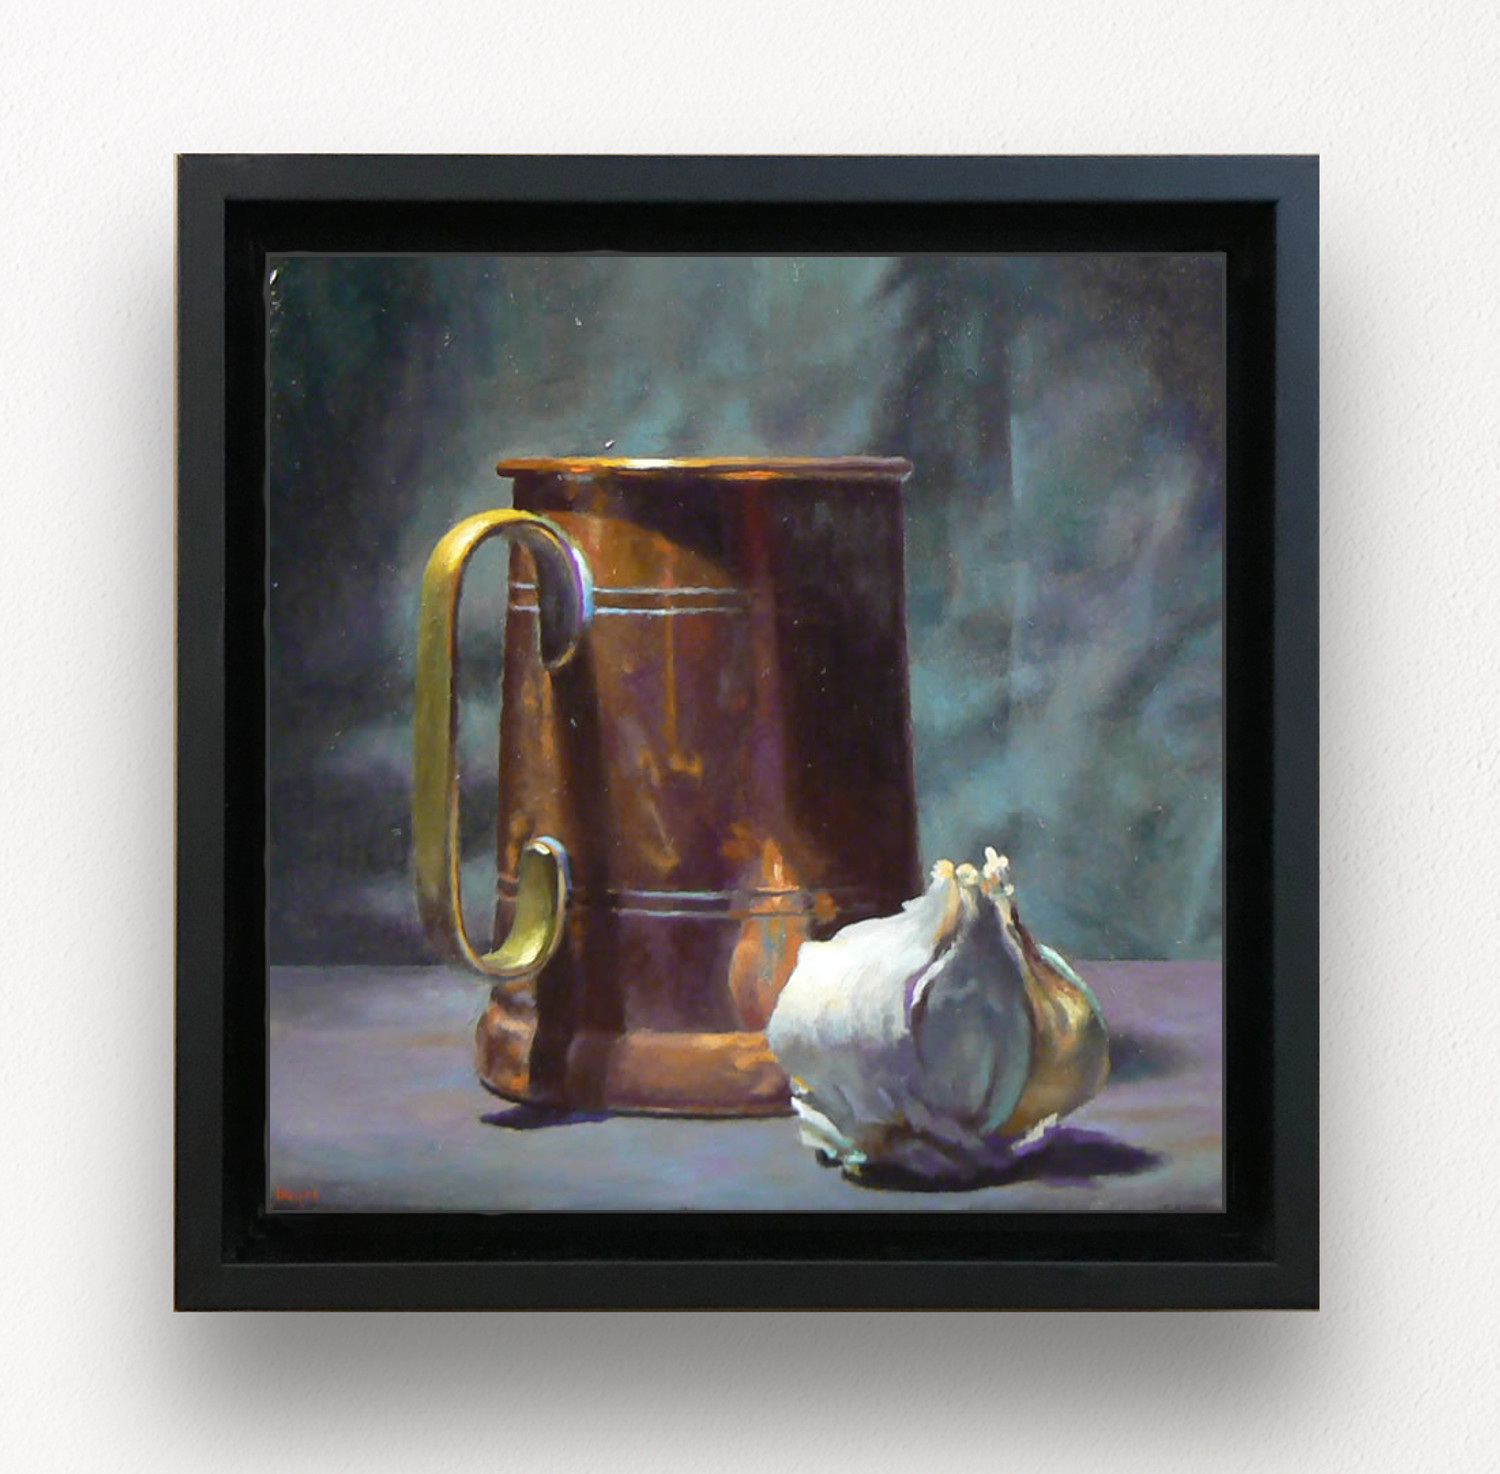 “Copper and Garlic” Framed Print On Canvas